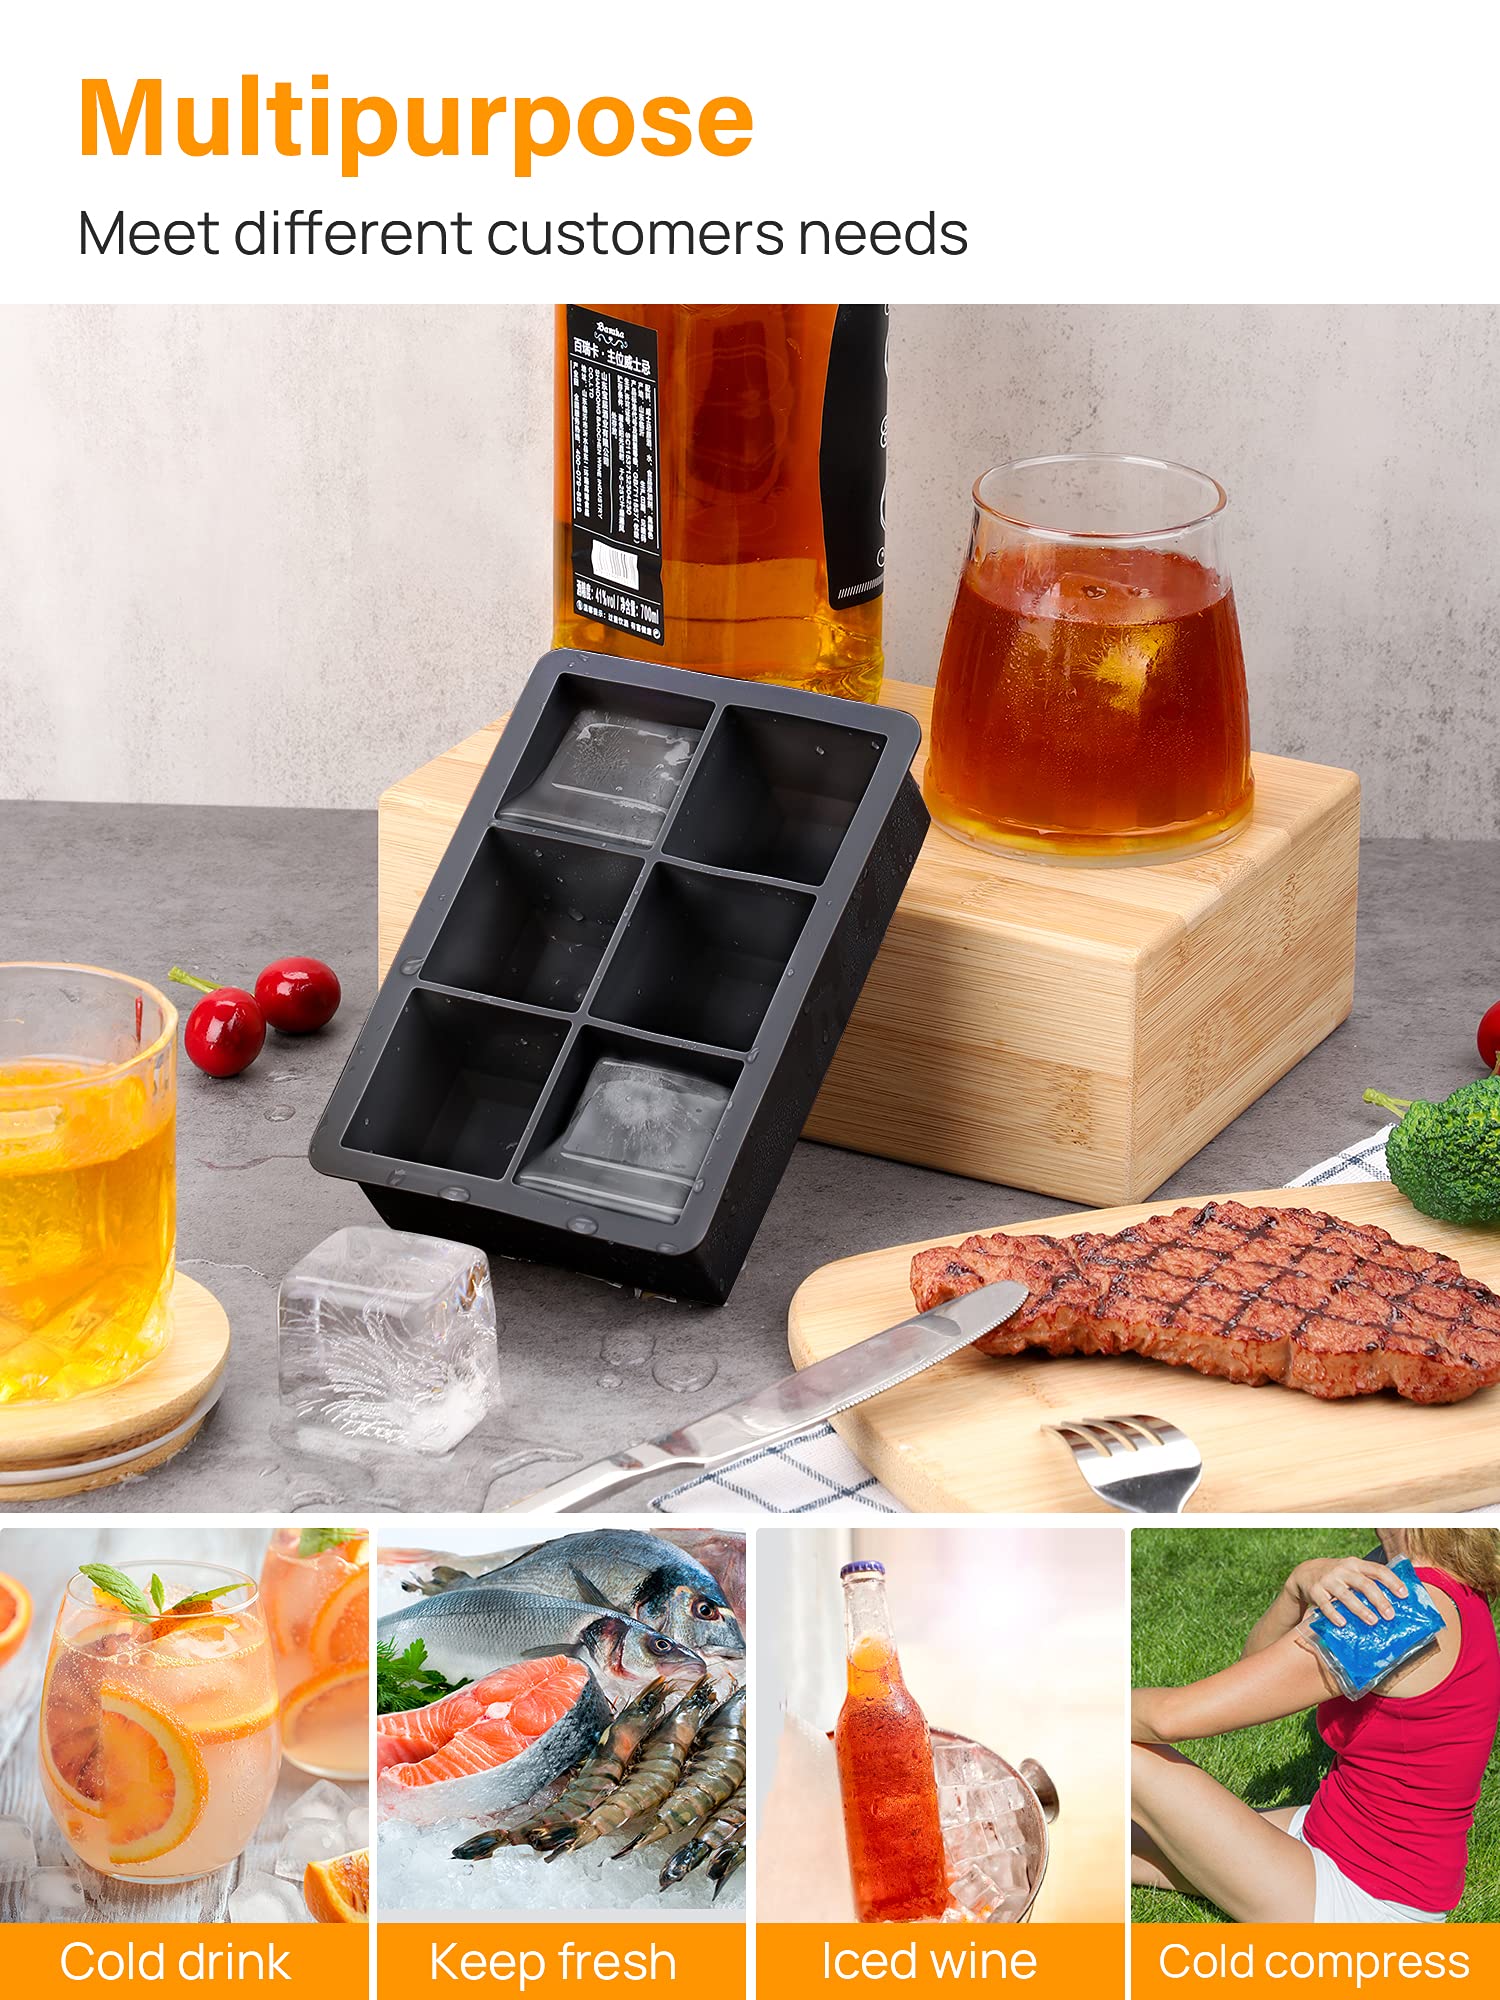 Large Ice Cube Tray 2 Pack Silicone Ice Cube Trays with Lid for Freezer  Stackable Ice Cube Mold for Making Large Square Ice Cubes for Cocktails 